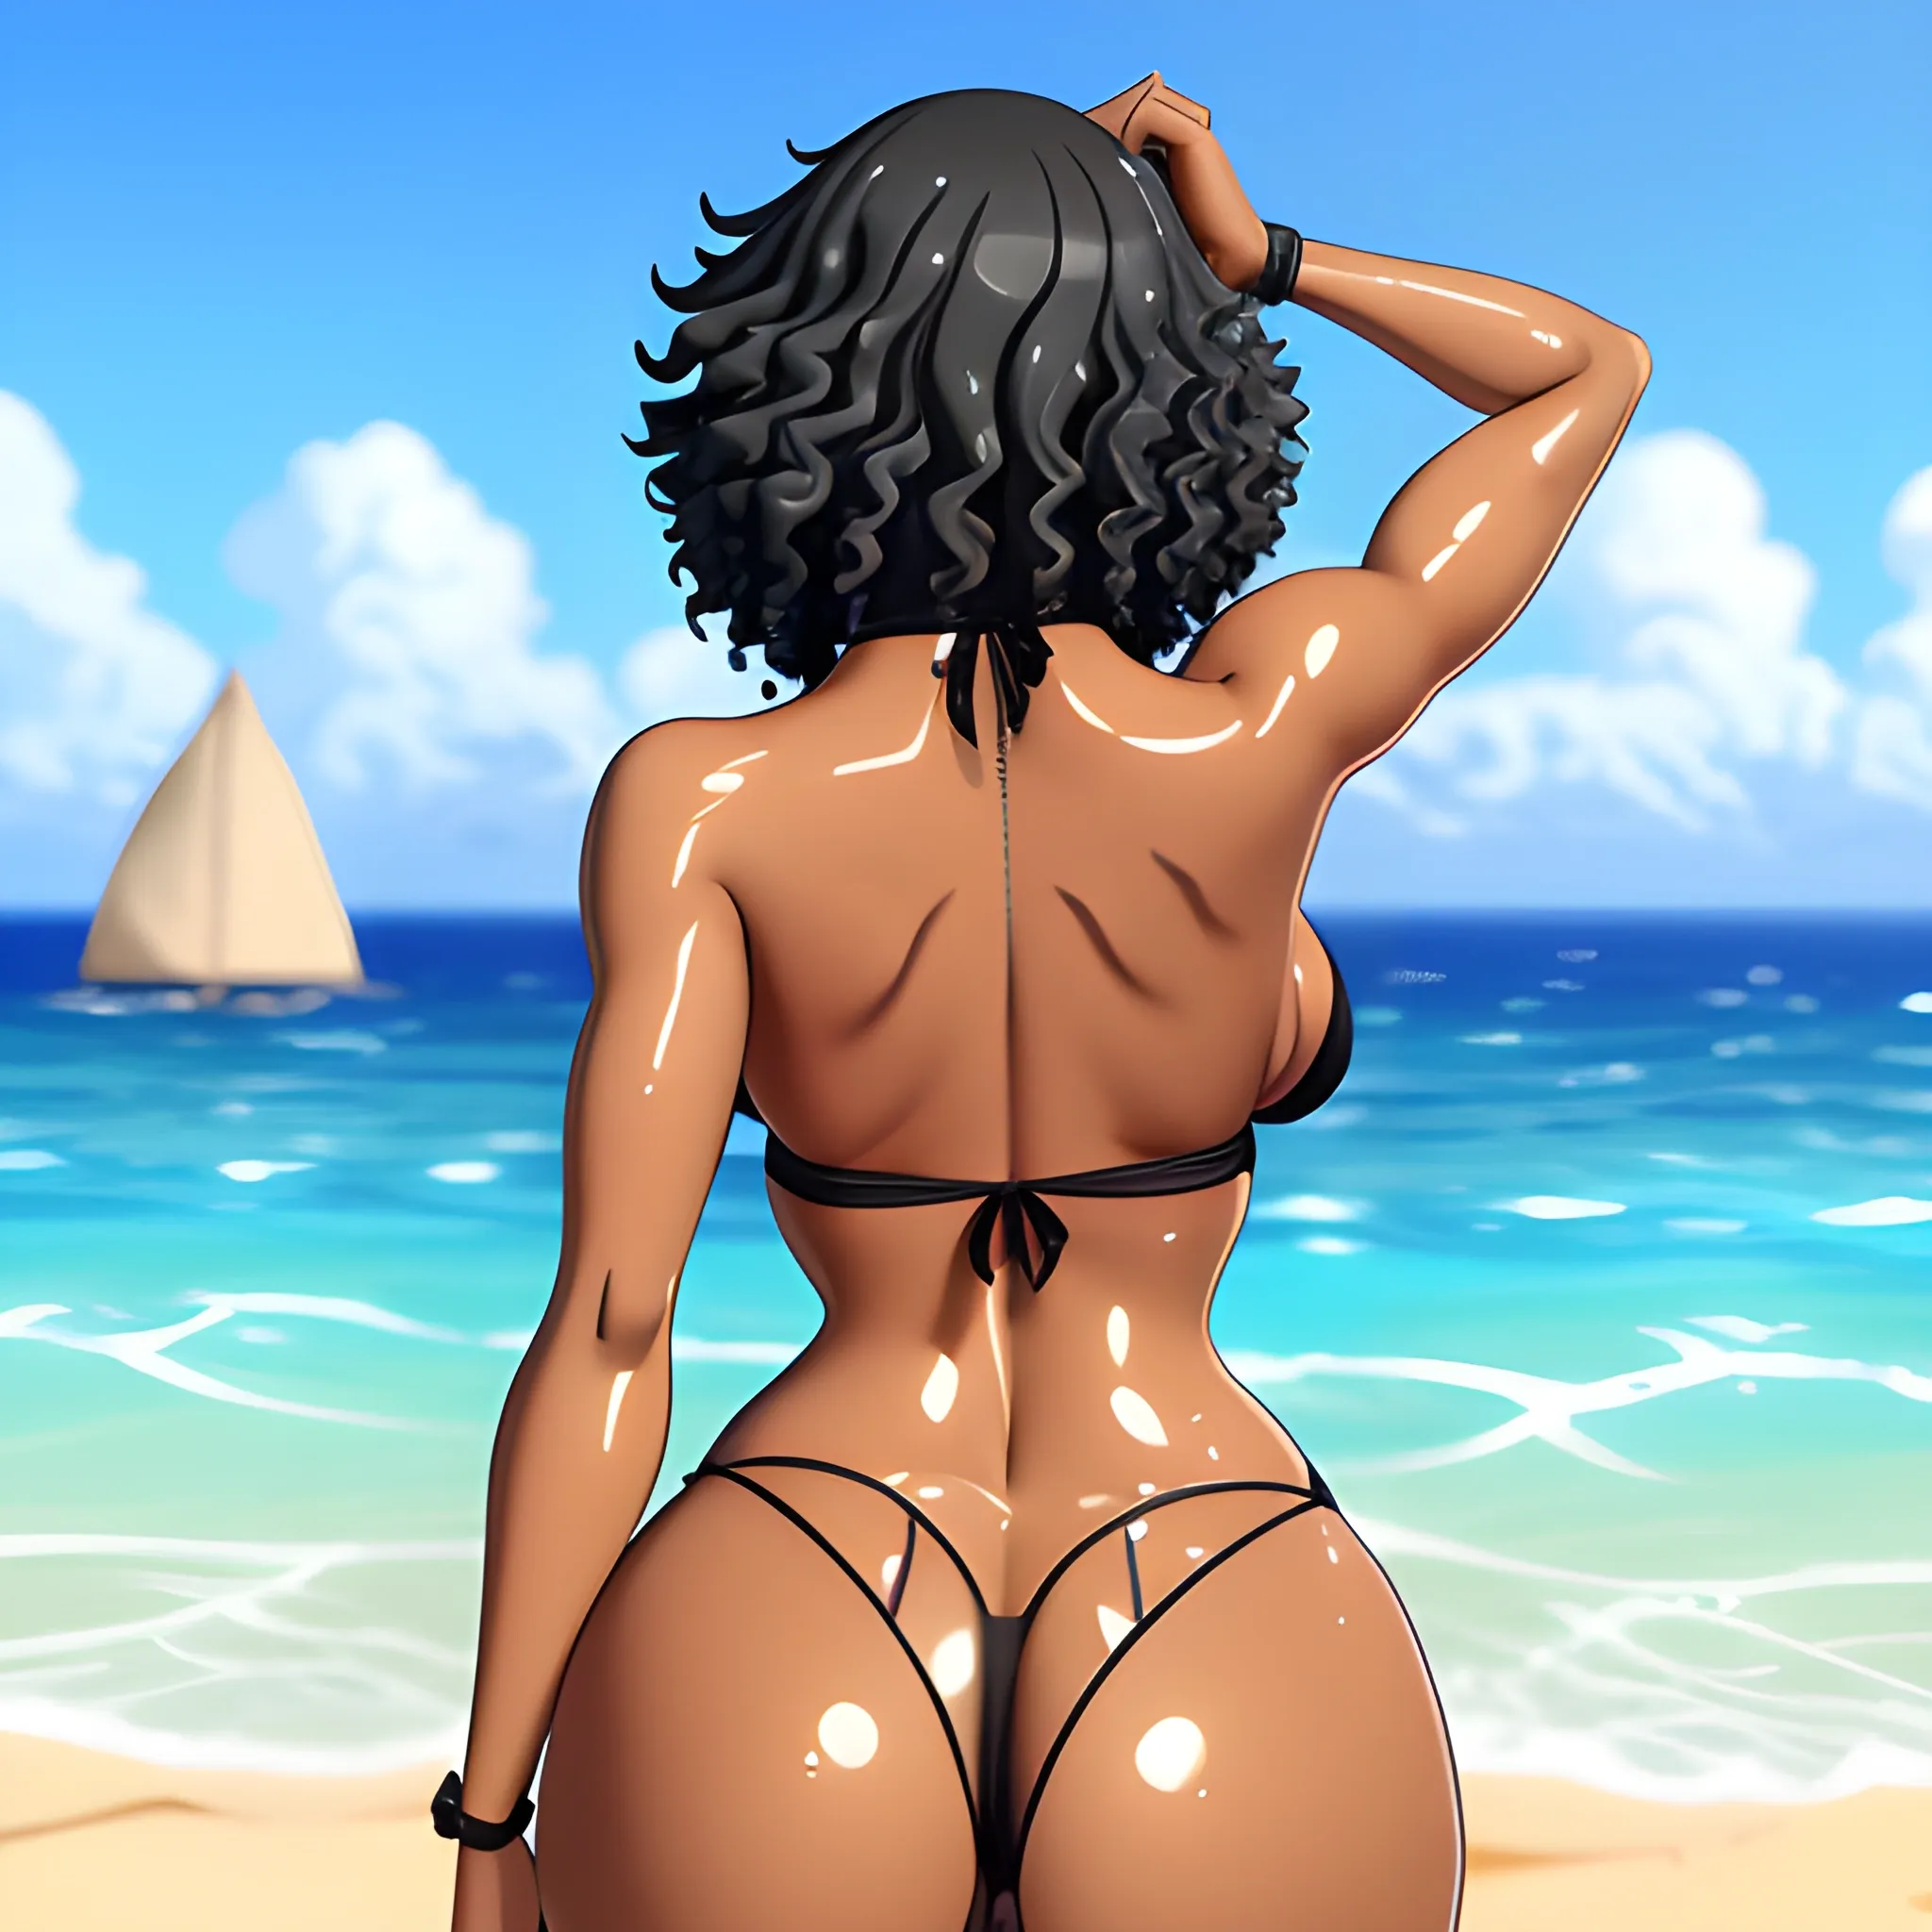 Anime,beach,rear view, blackskin,cute girl,black curly hair,cartoon,hand under big butt,black micro bikini, black choker, perfect face expressions, perfect anatomy, medium breasts, wide hips, thicc thighs, wet skin, beach, summer, bathing in the sea water, splashing water, extremely detailed CG, high detail, extremely detailed artwork, masterpiece artwork, shark in water

